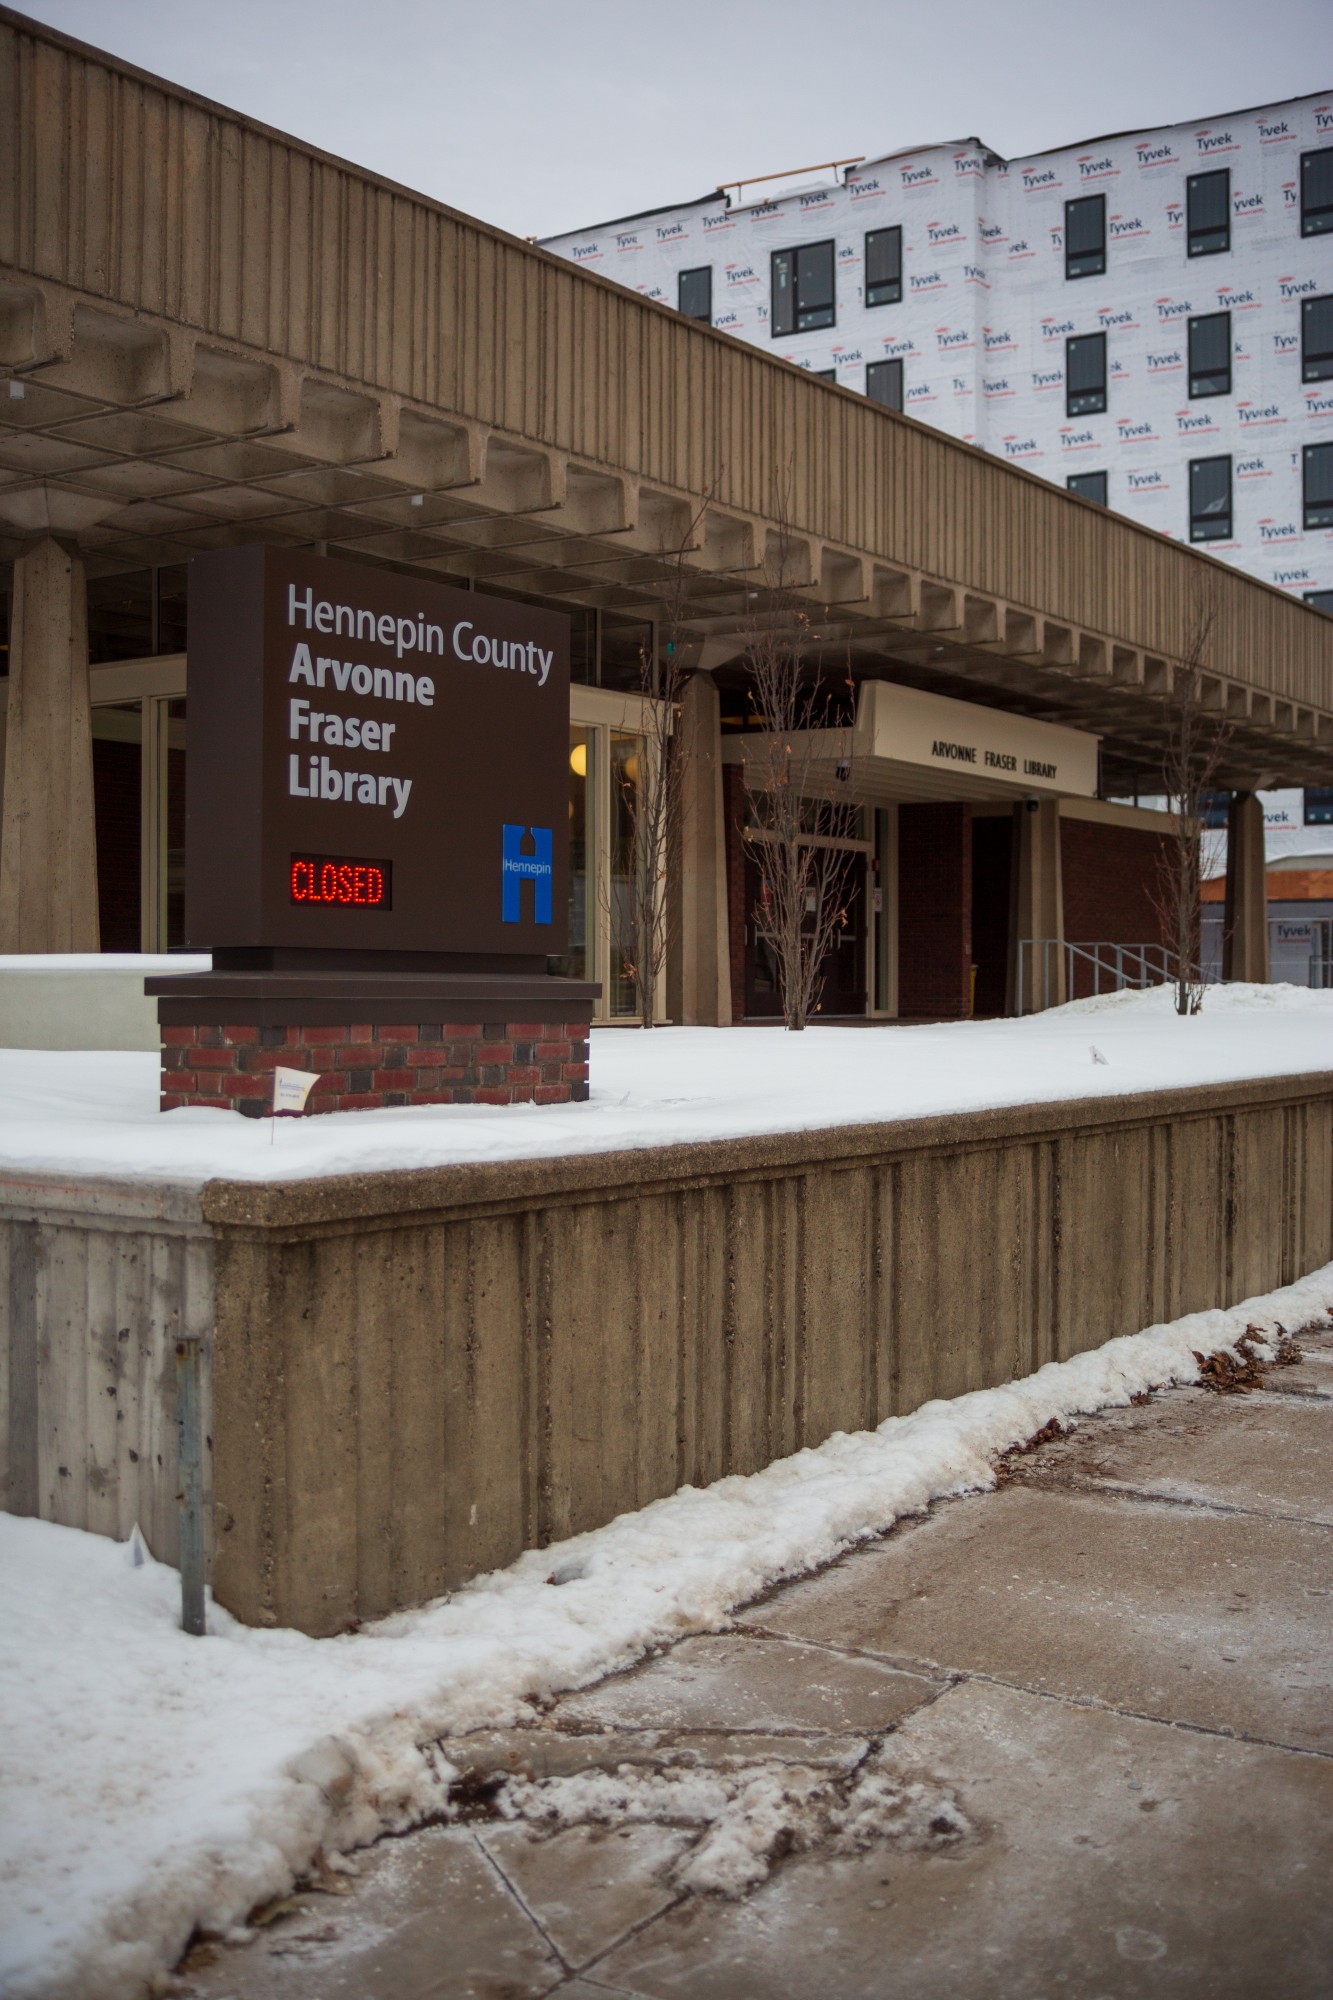 New installments in the Arvonne Fraser Library pay tribute to the buildings original architect, Ralph Rapson and library patron Arvonne Fraser on Friday, Jan. 17.  The newly renovated building is set to open on Jan. 25. (Liam Armstrong / Minnesota Daily)